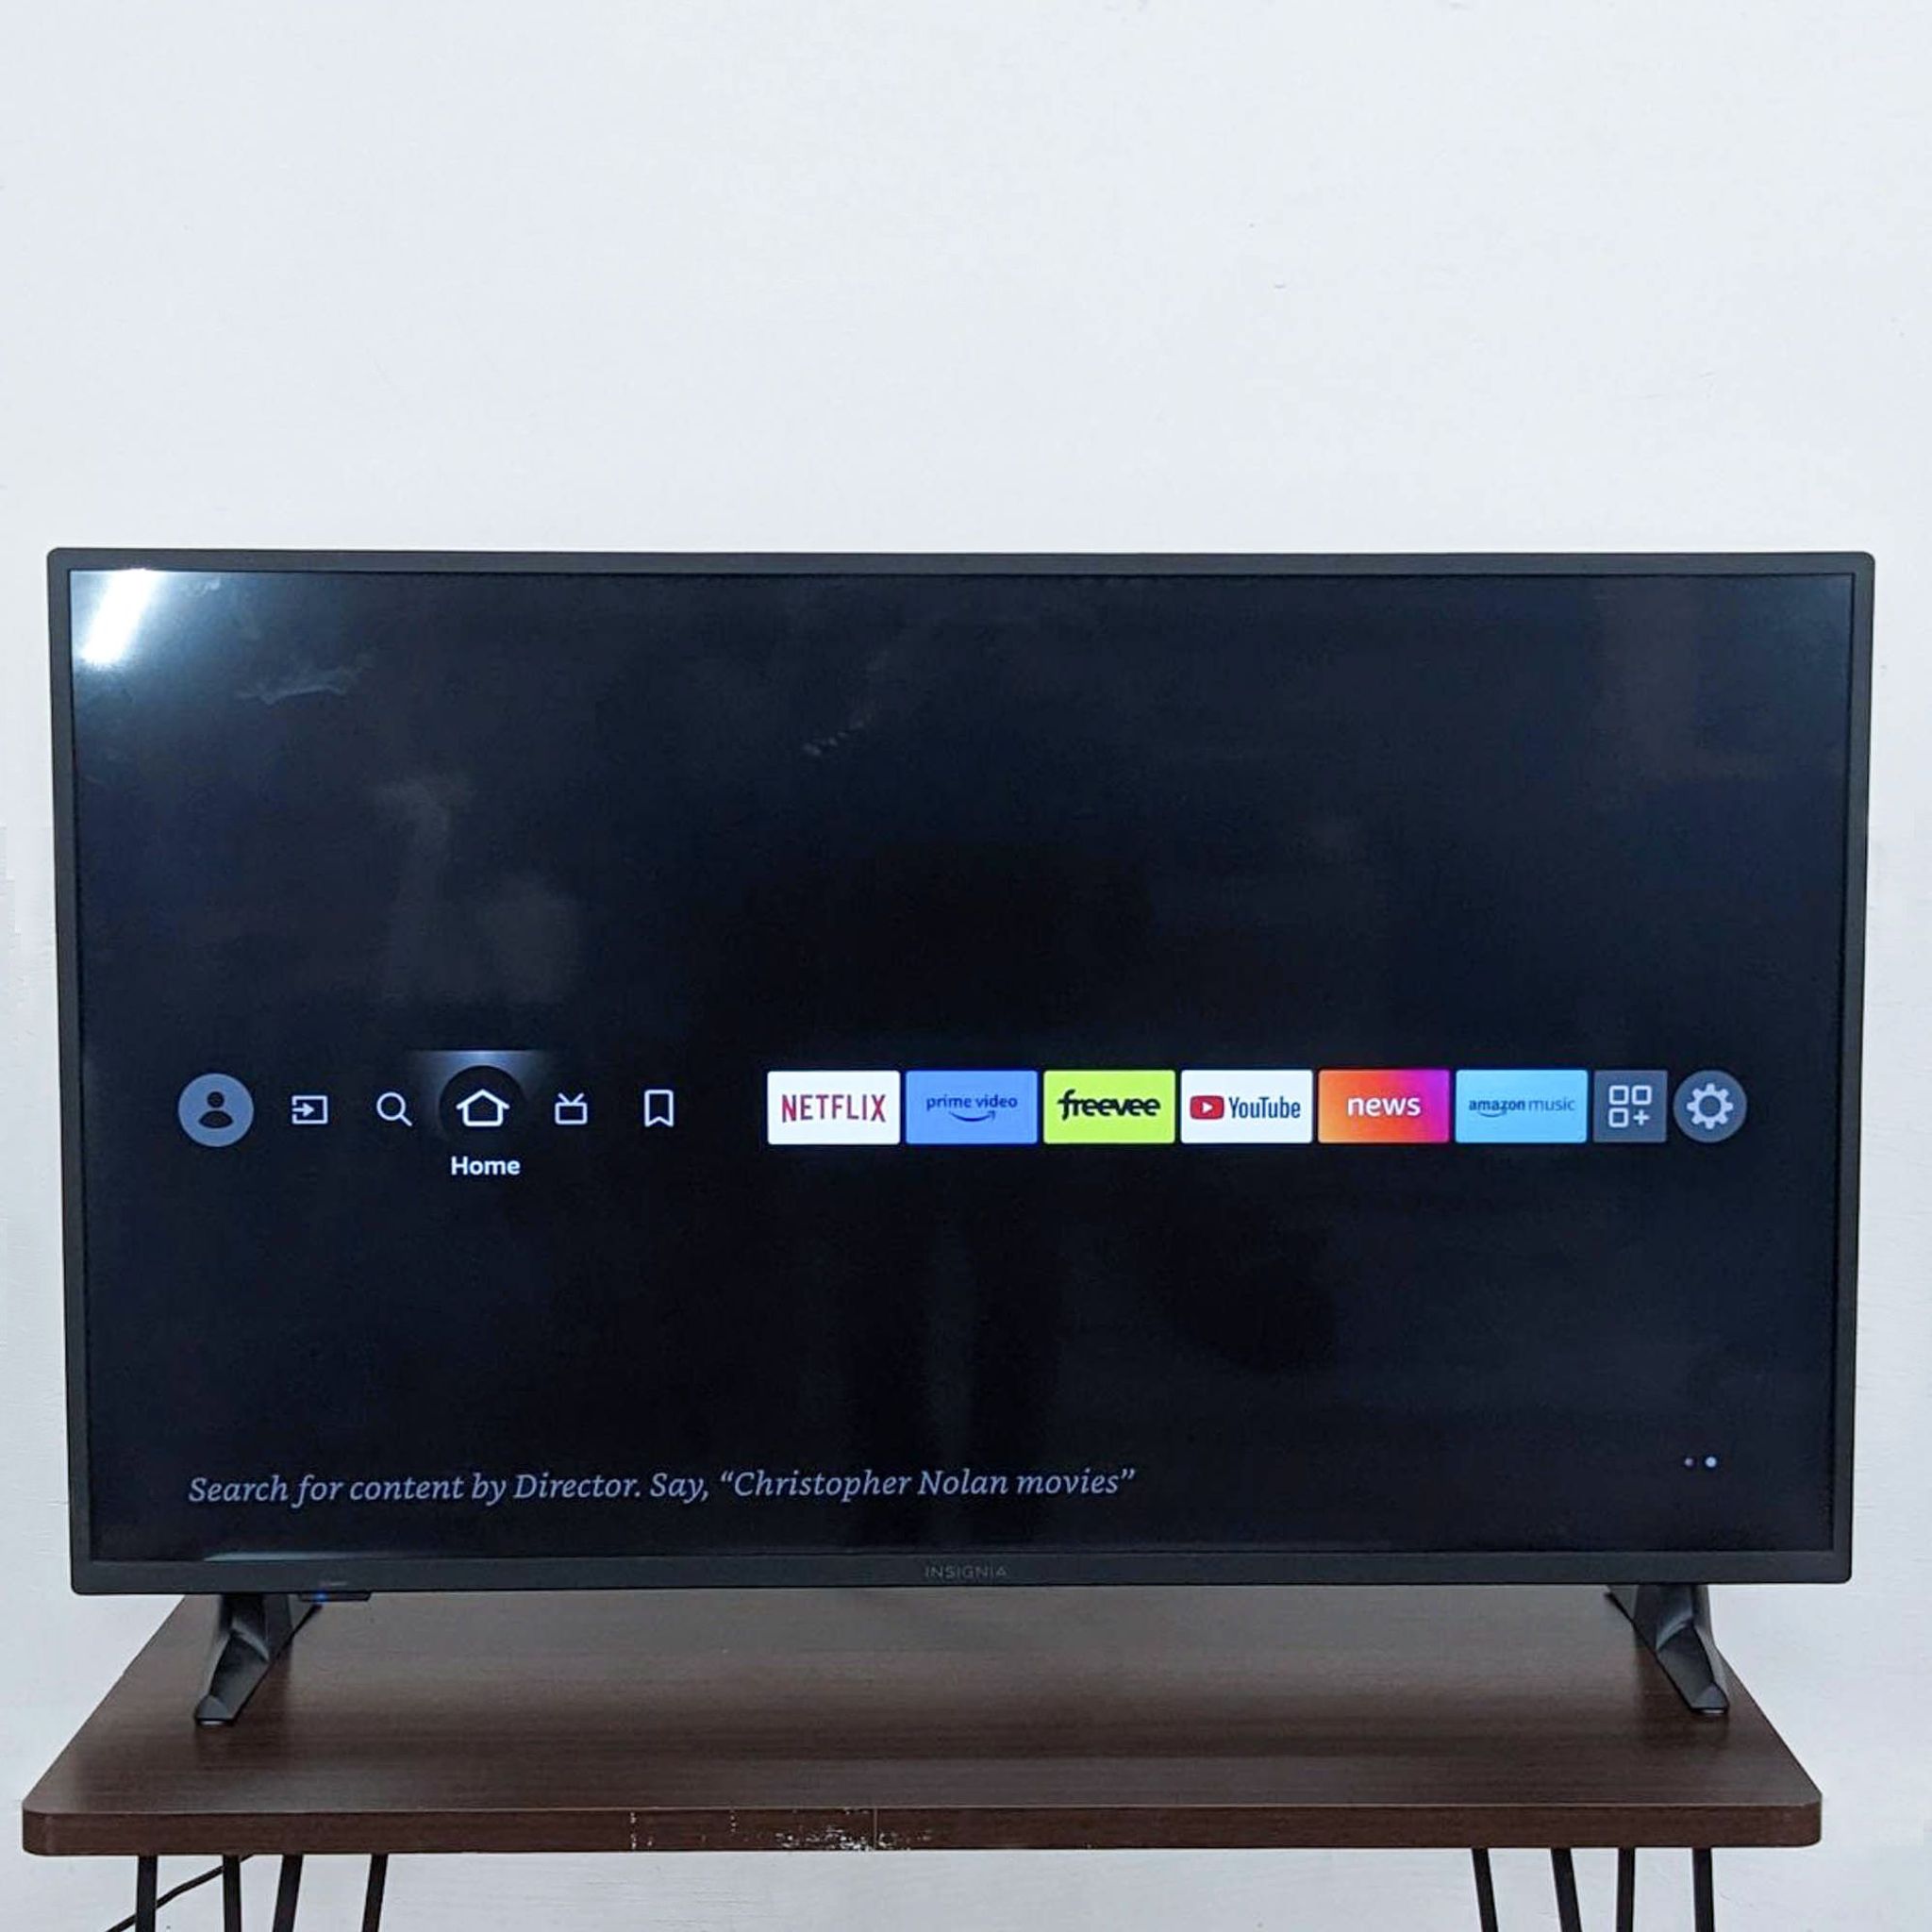 Insignia TV on stand displaying smart interface with streaming apps like Netflix and a search prompt.